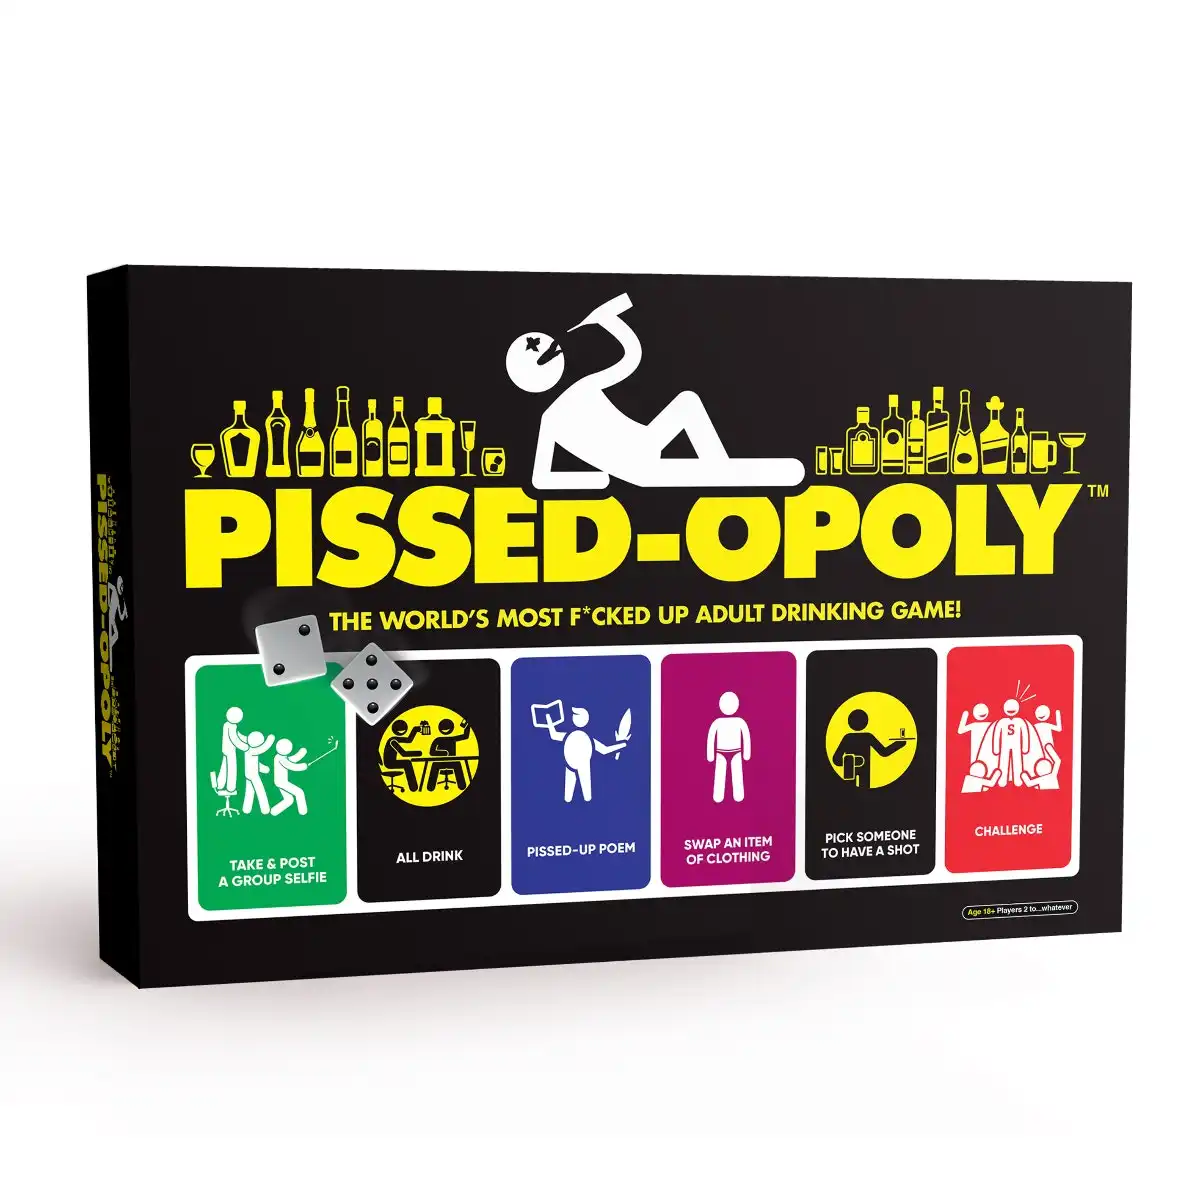 Pissed-Opoly